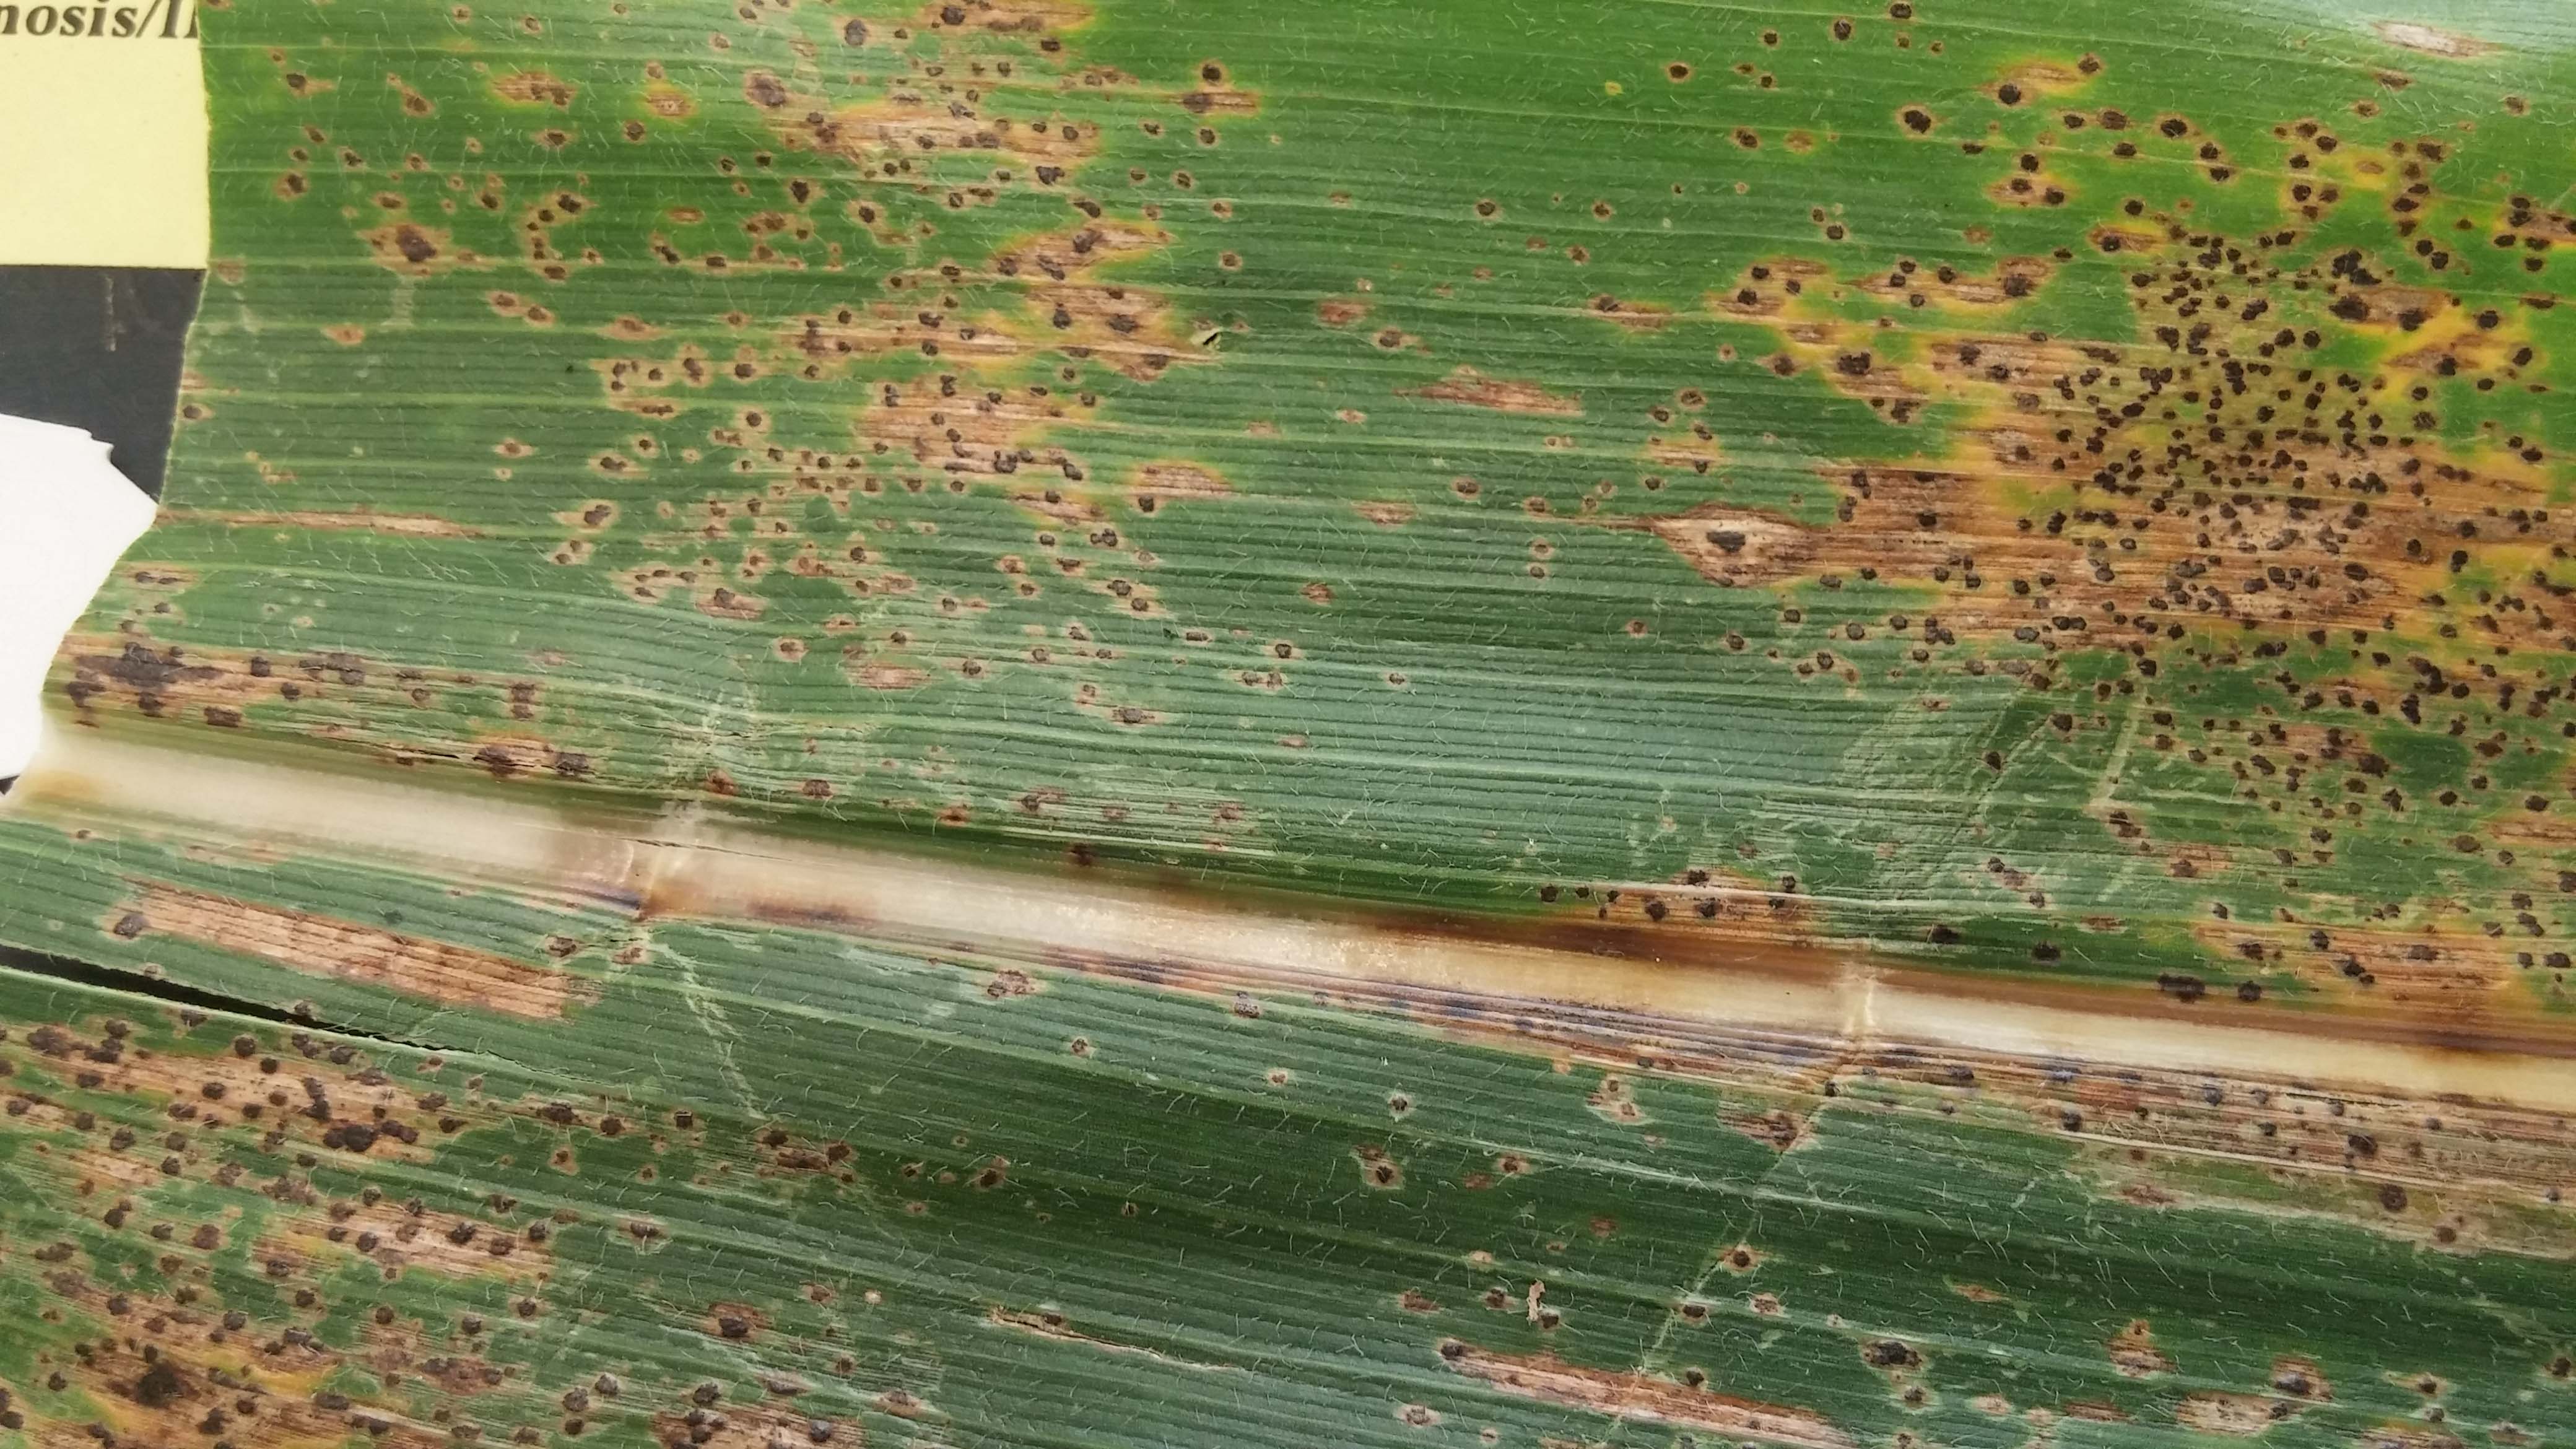 Characteristic tar spot symptoms and signs on corn leaf.